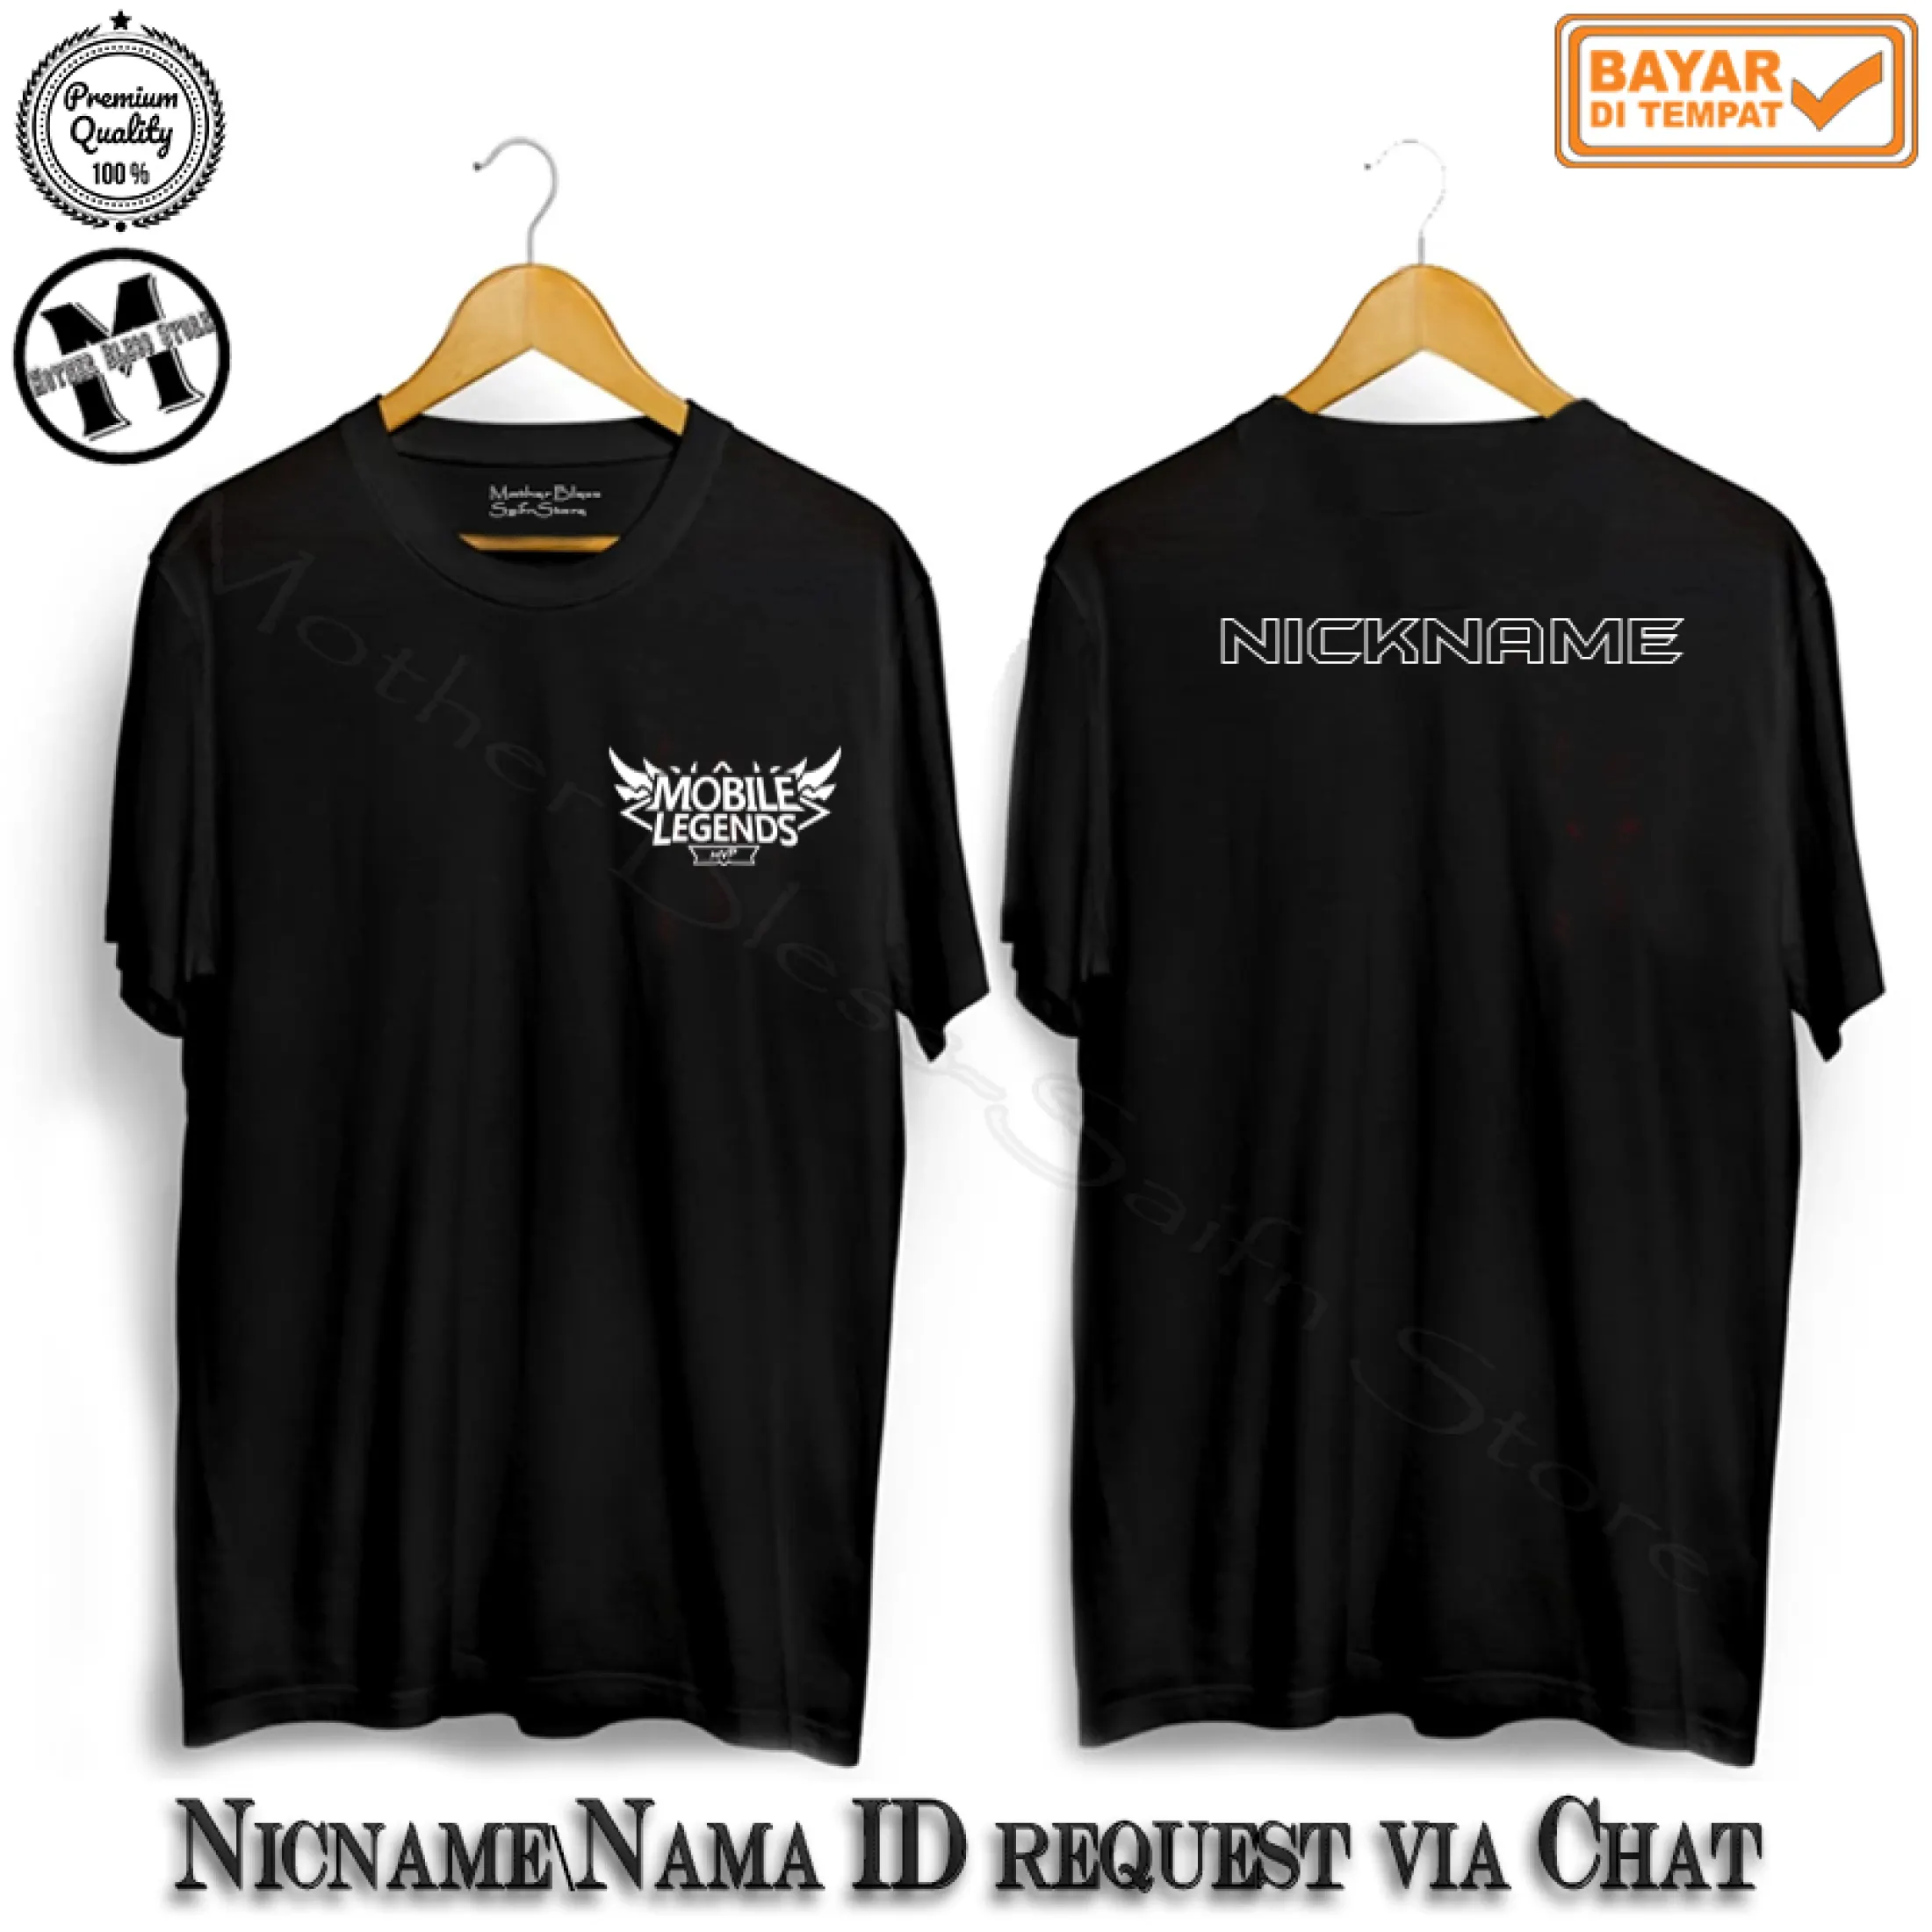 Mother Bless Store Kaos MLBB Bisa Request Nama ID Nickname Mobile Legends Logo White Lazada Indonesia